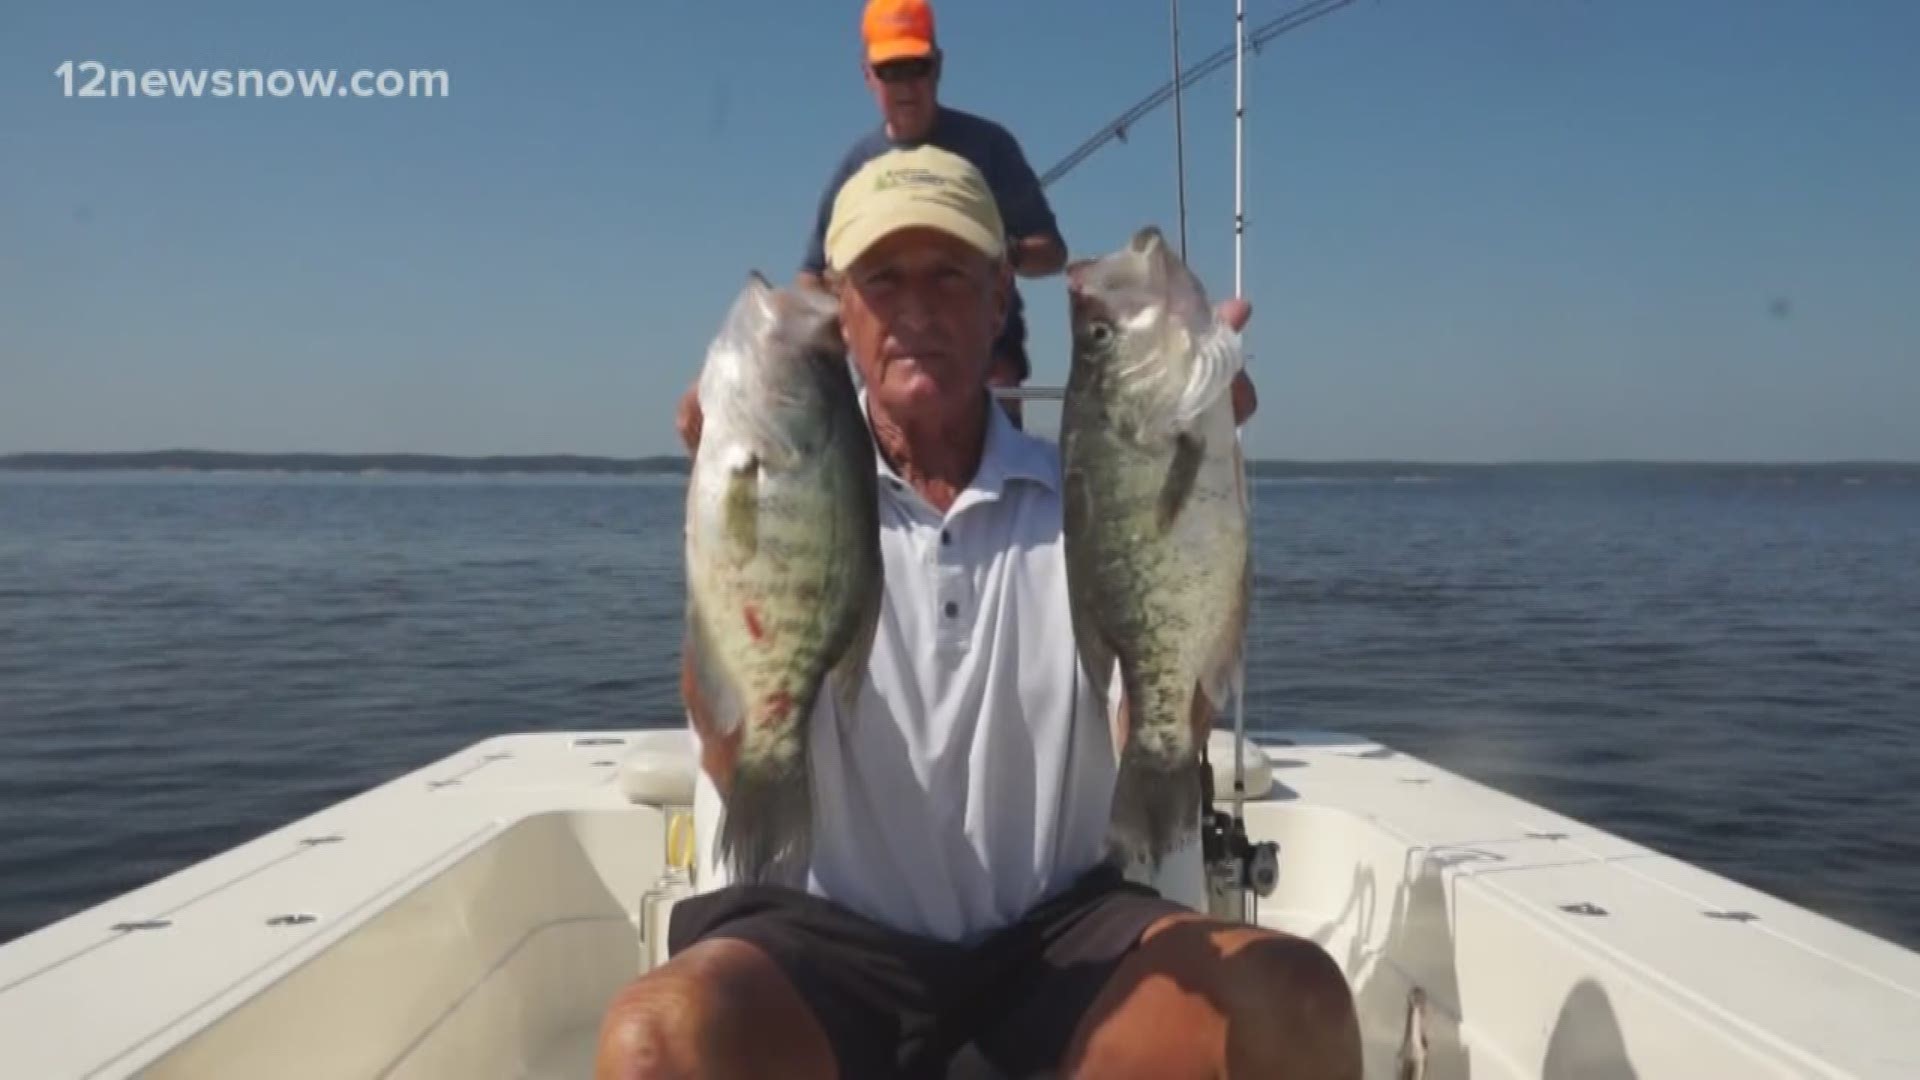 JD Batten gives tips on how to fill your ice chest with crappie